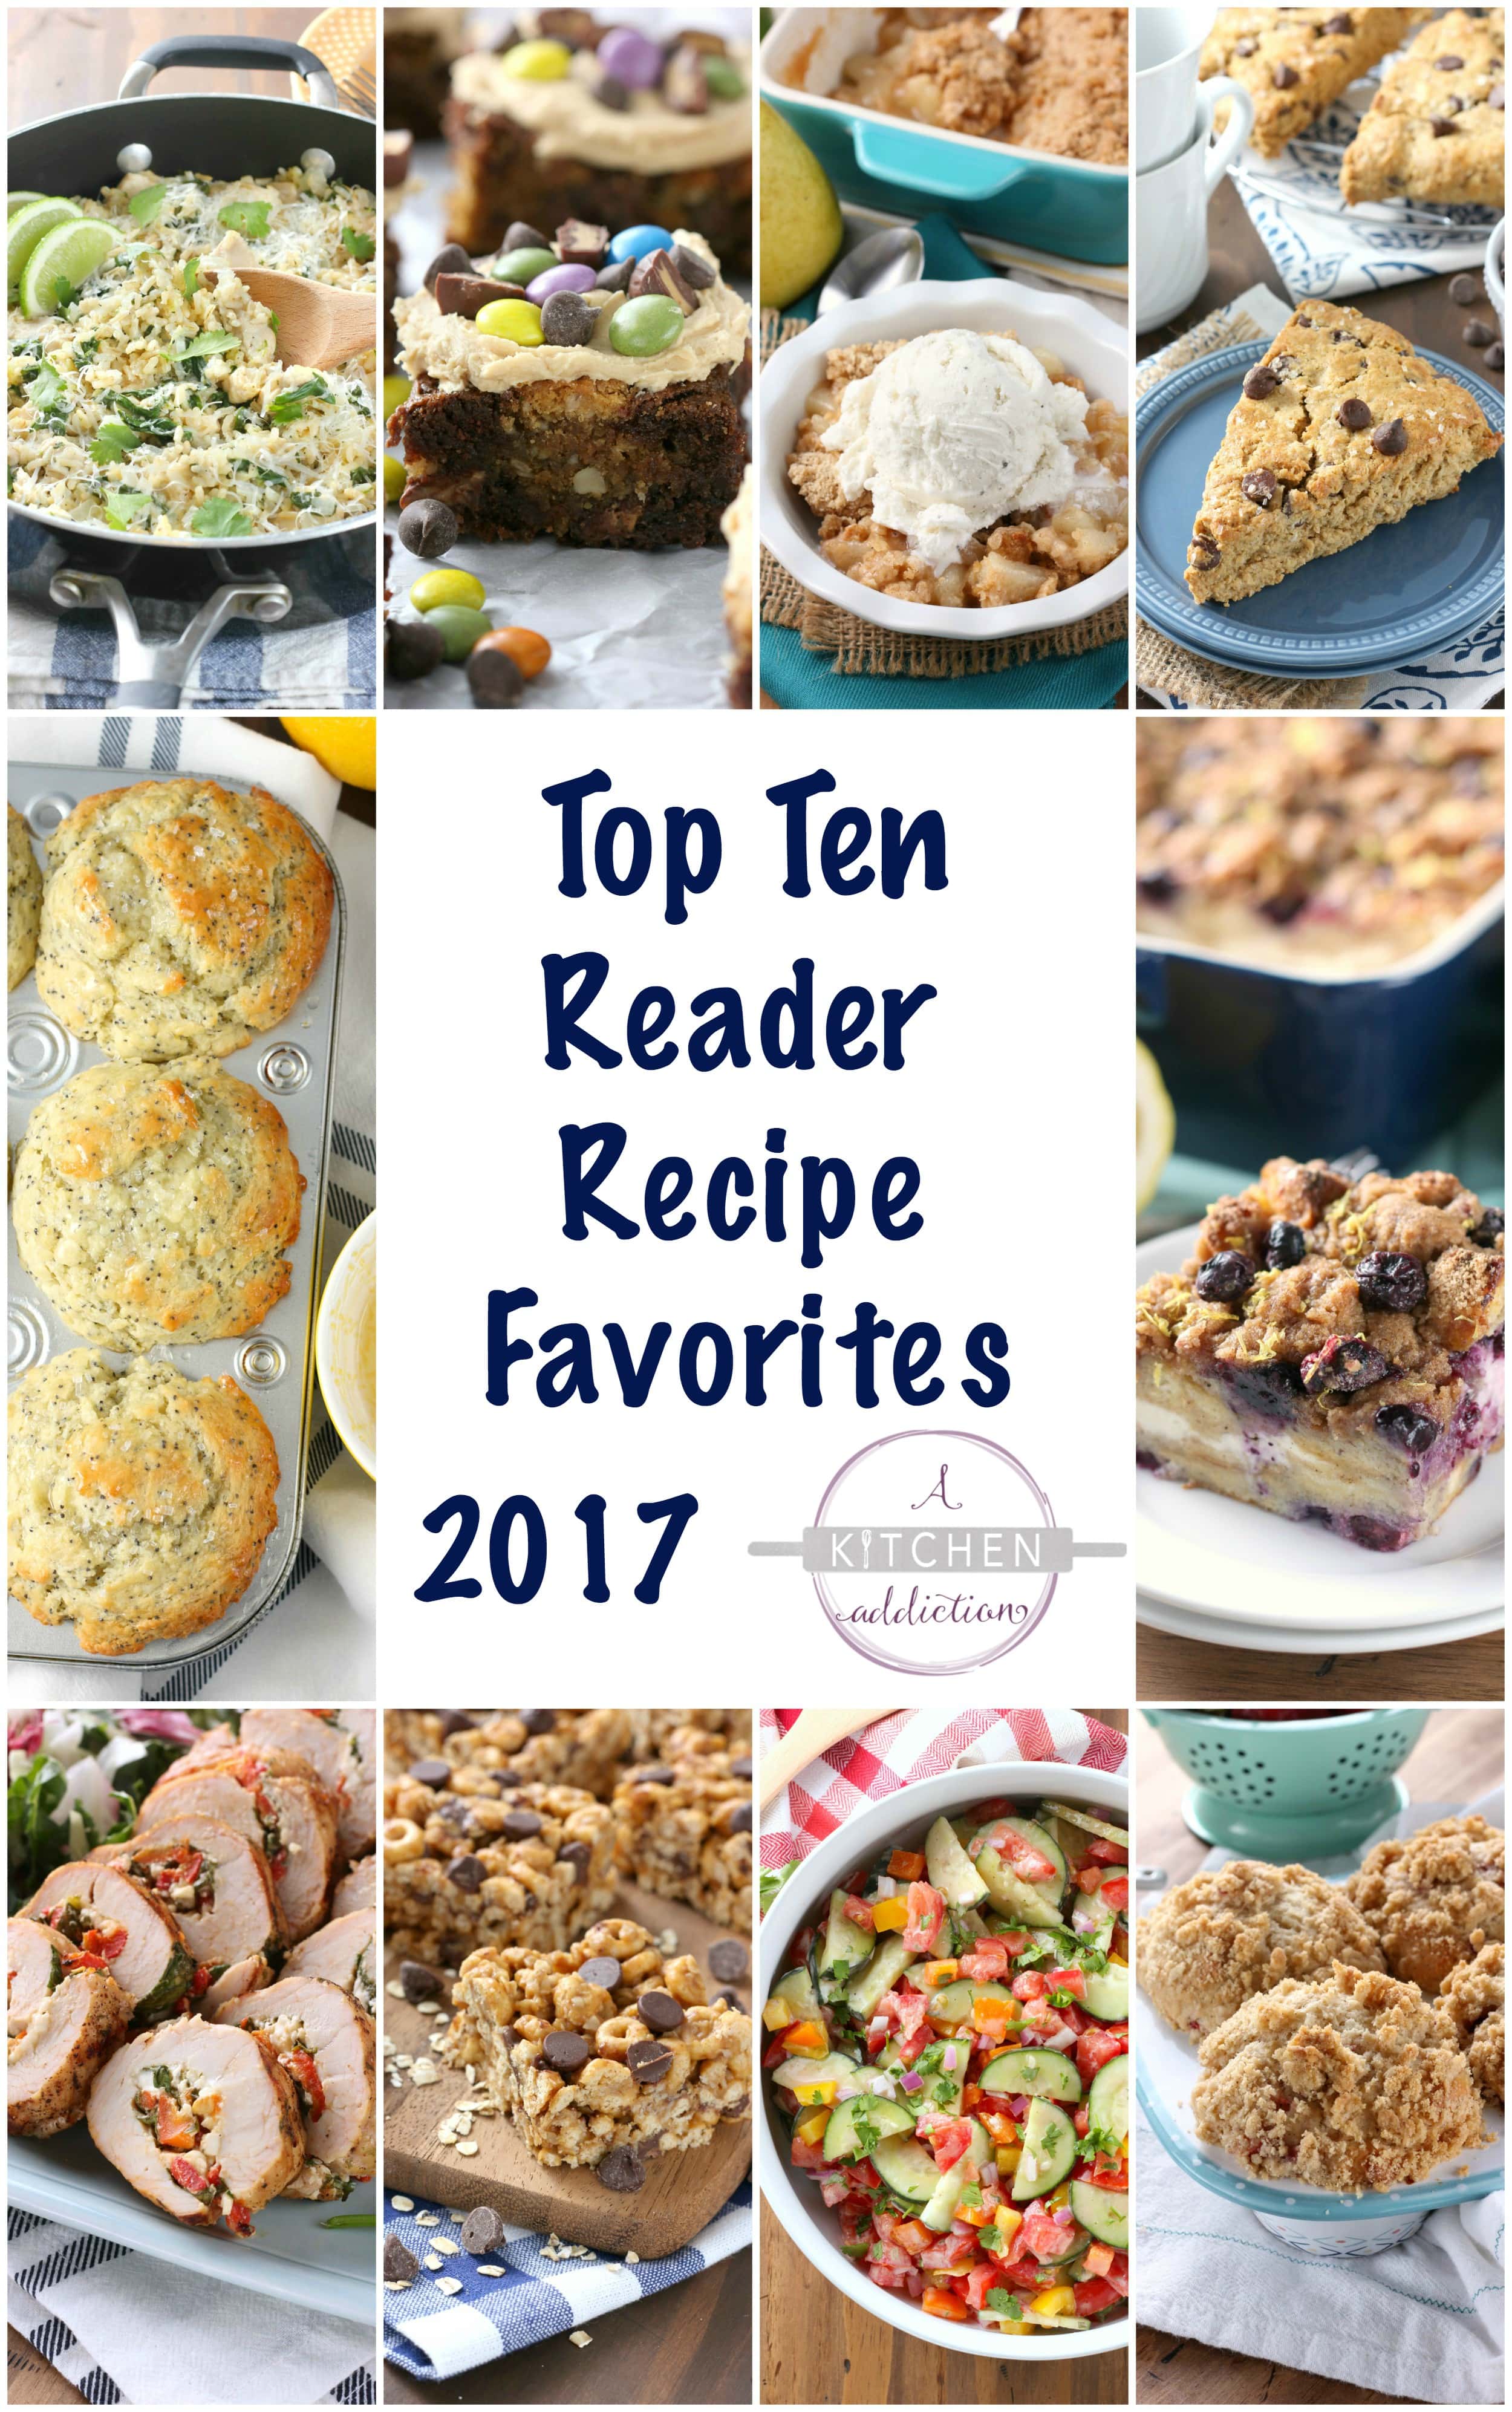 Top Ten Reader Recipe Favorites 2017 from A Kitchen Addiction